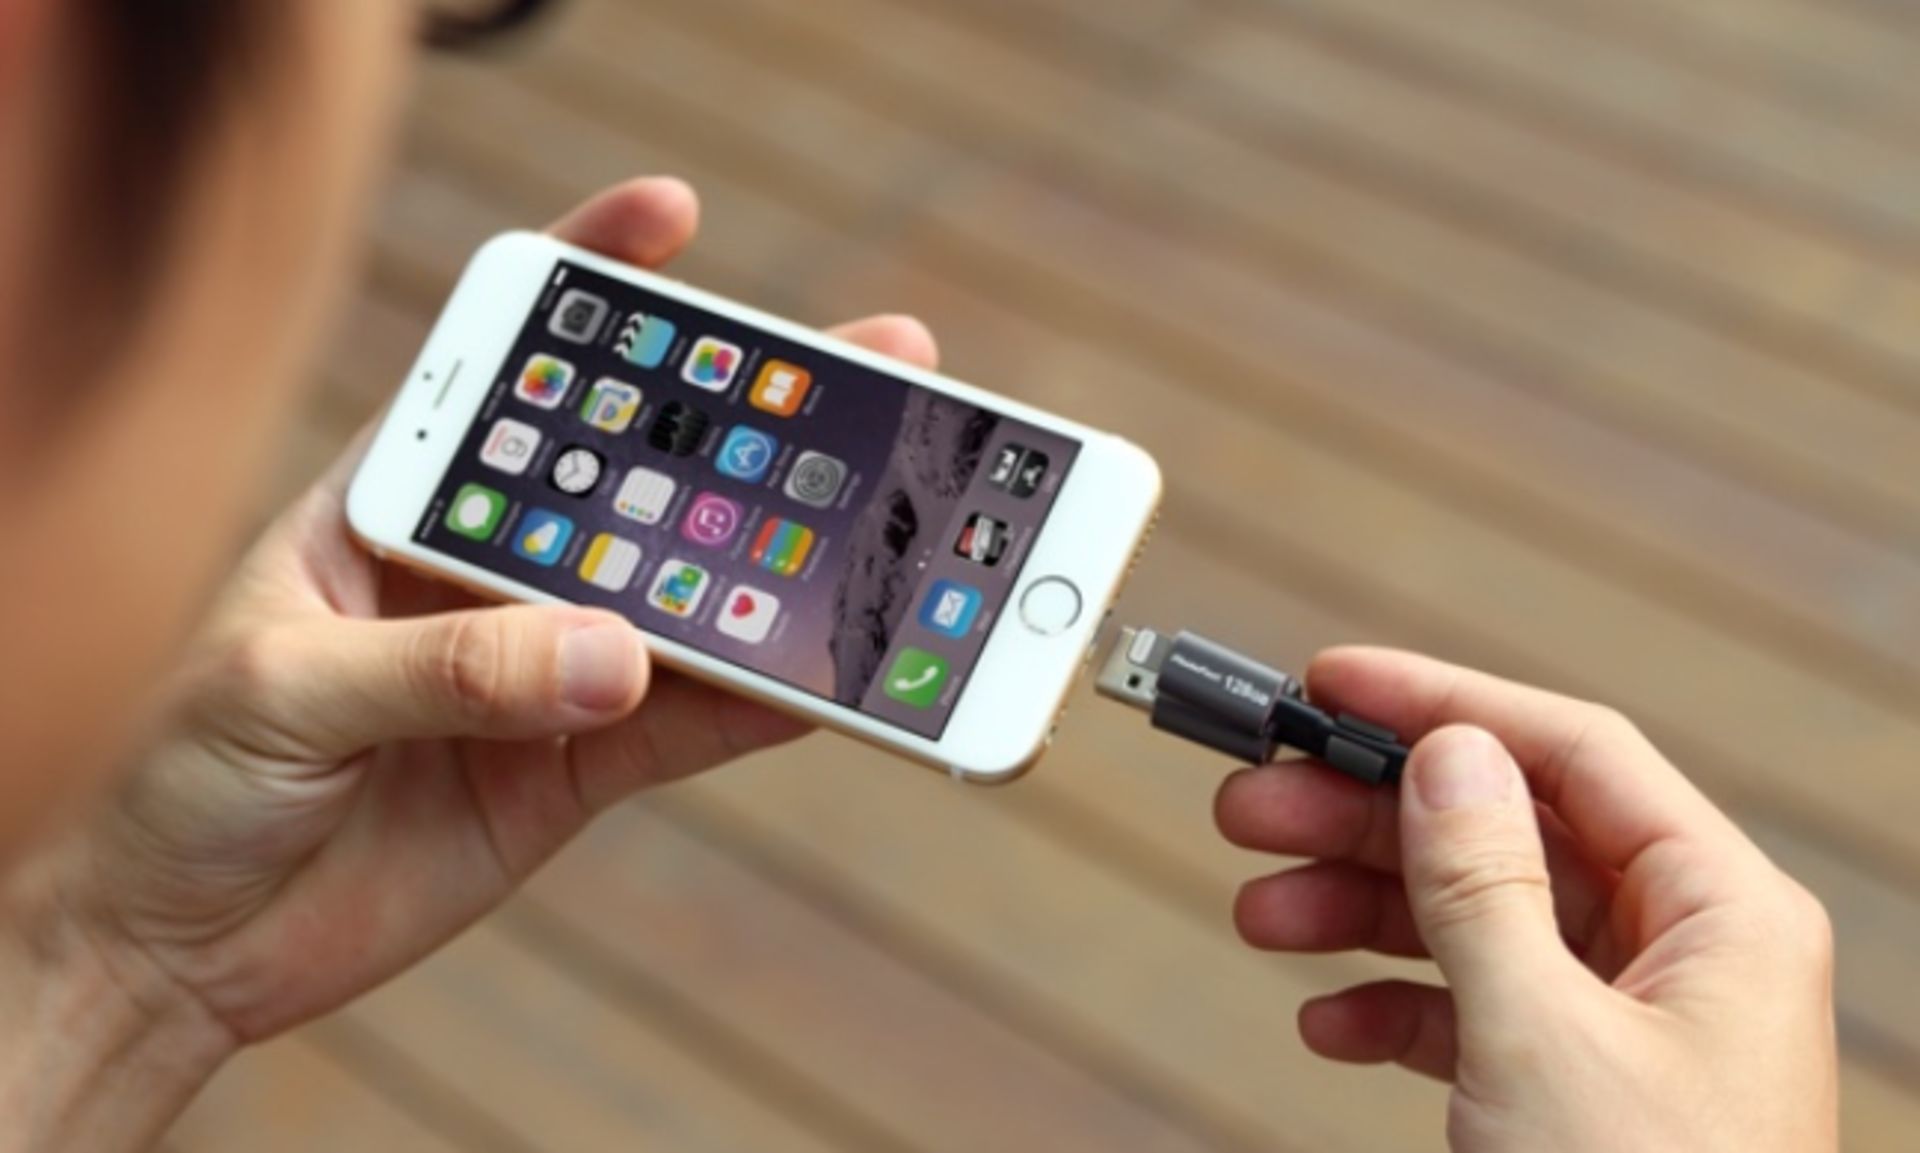 MemoryCable stores up to 128GB of content fro your iPhone